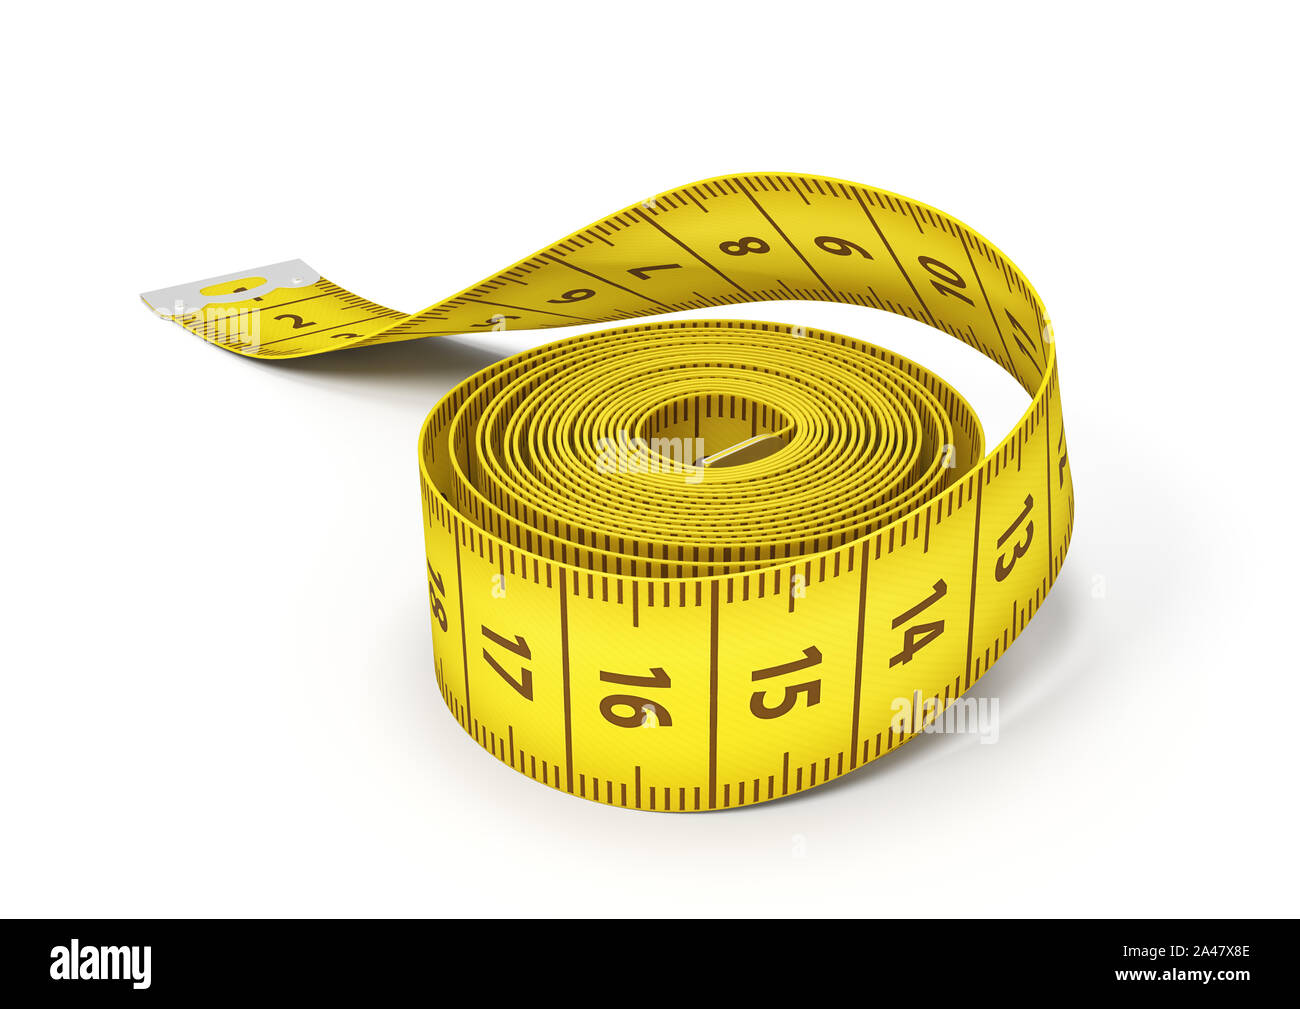 https://c8.alamy.com/comp/2A47X8E/3d-rendering-of-a-roll-of-a-yellow-measuring-tape-on-a-white-background-measurement-convention-dressmaking-and-tailoring-2A47X8E.jpg